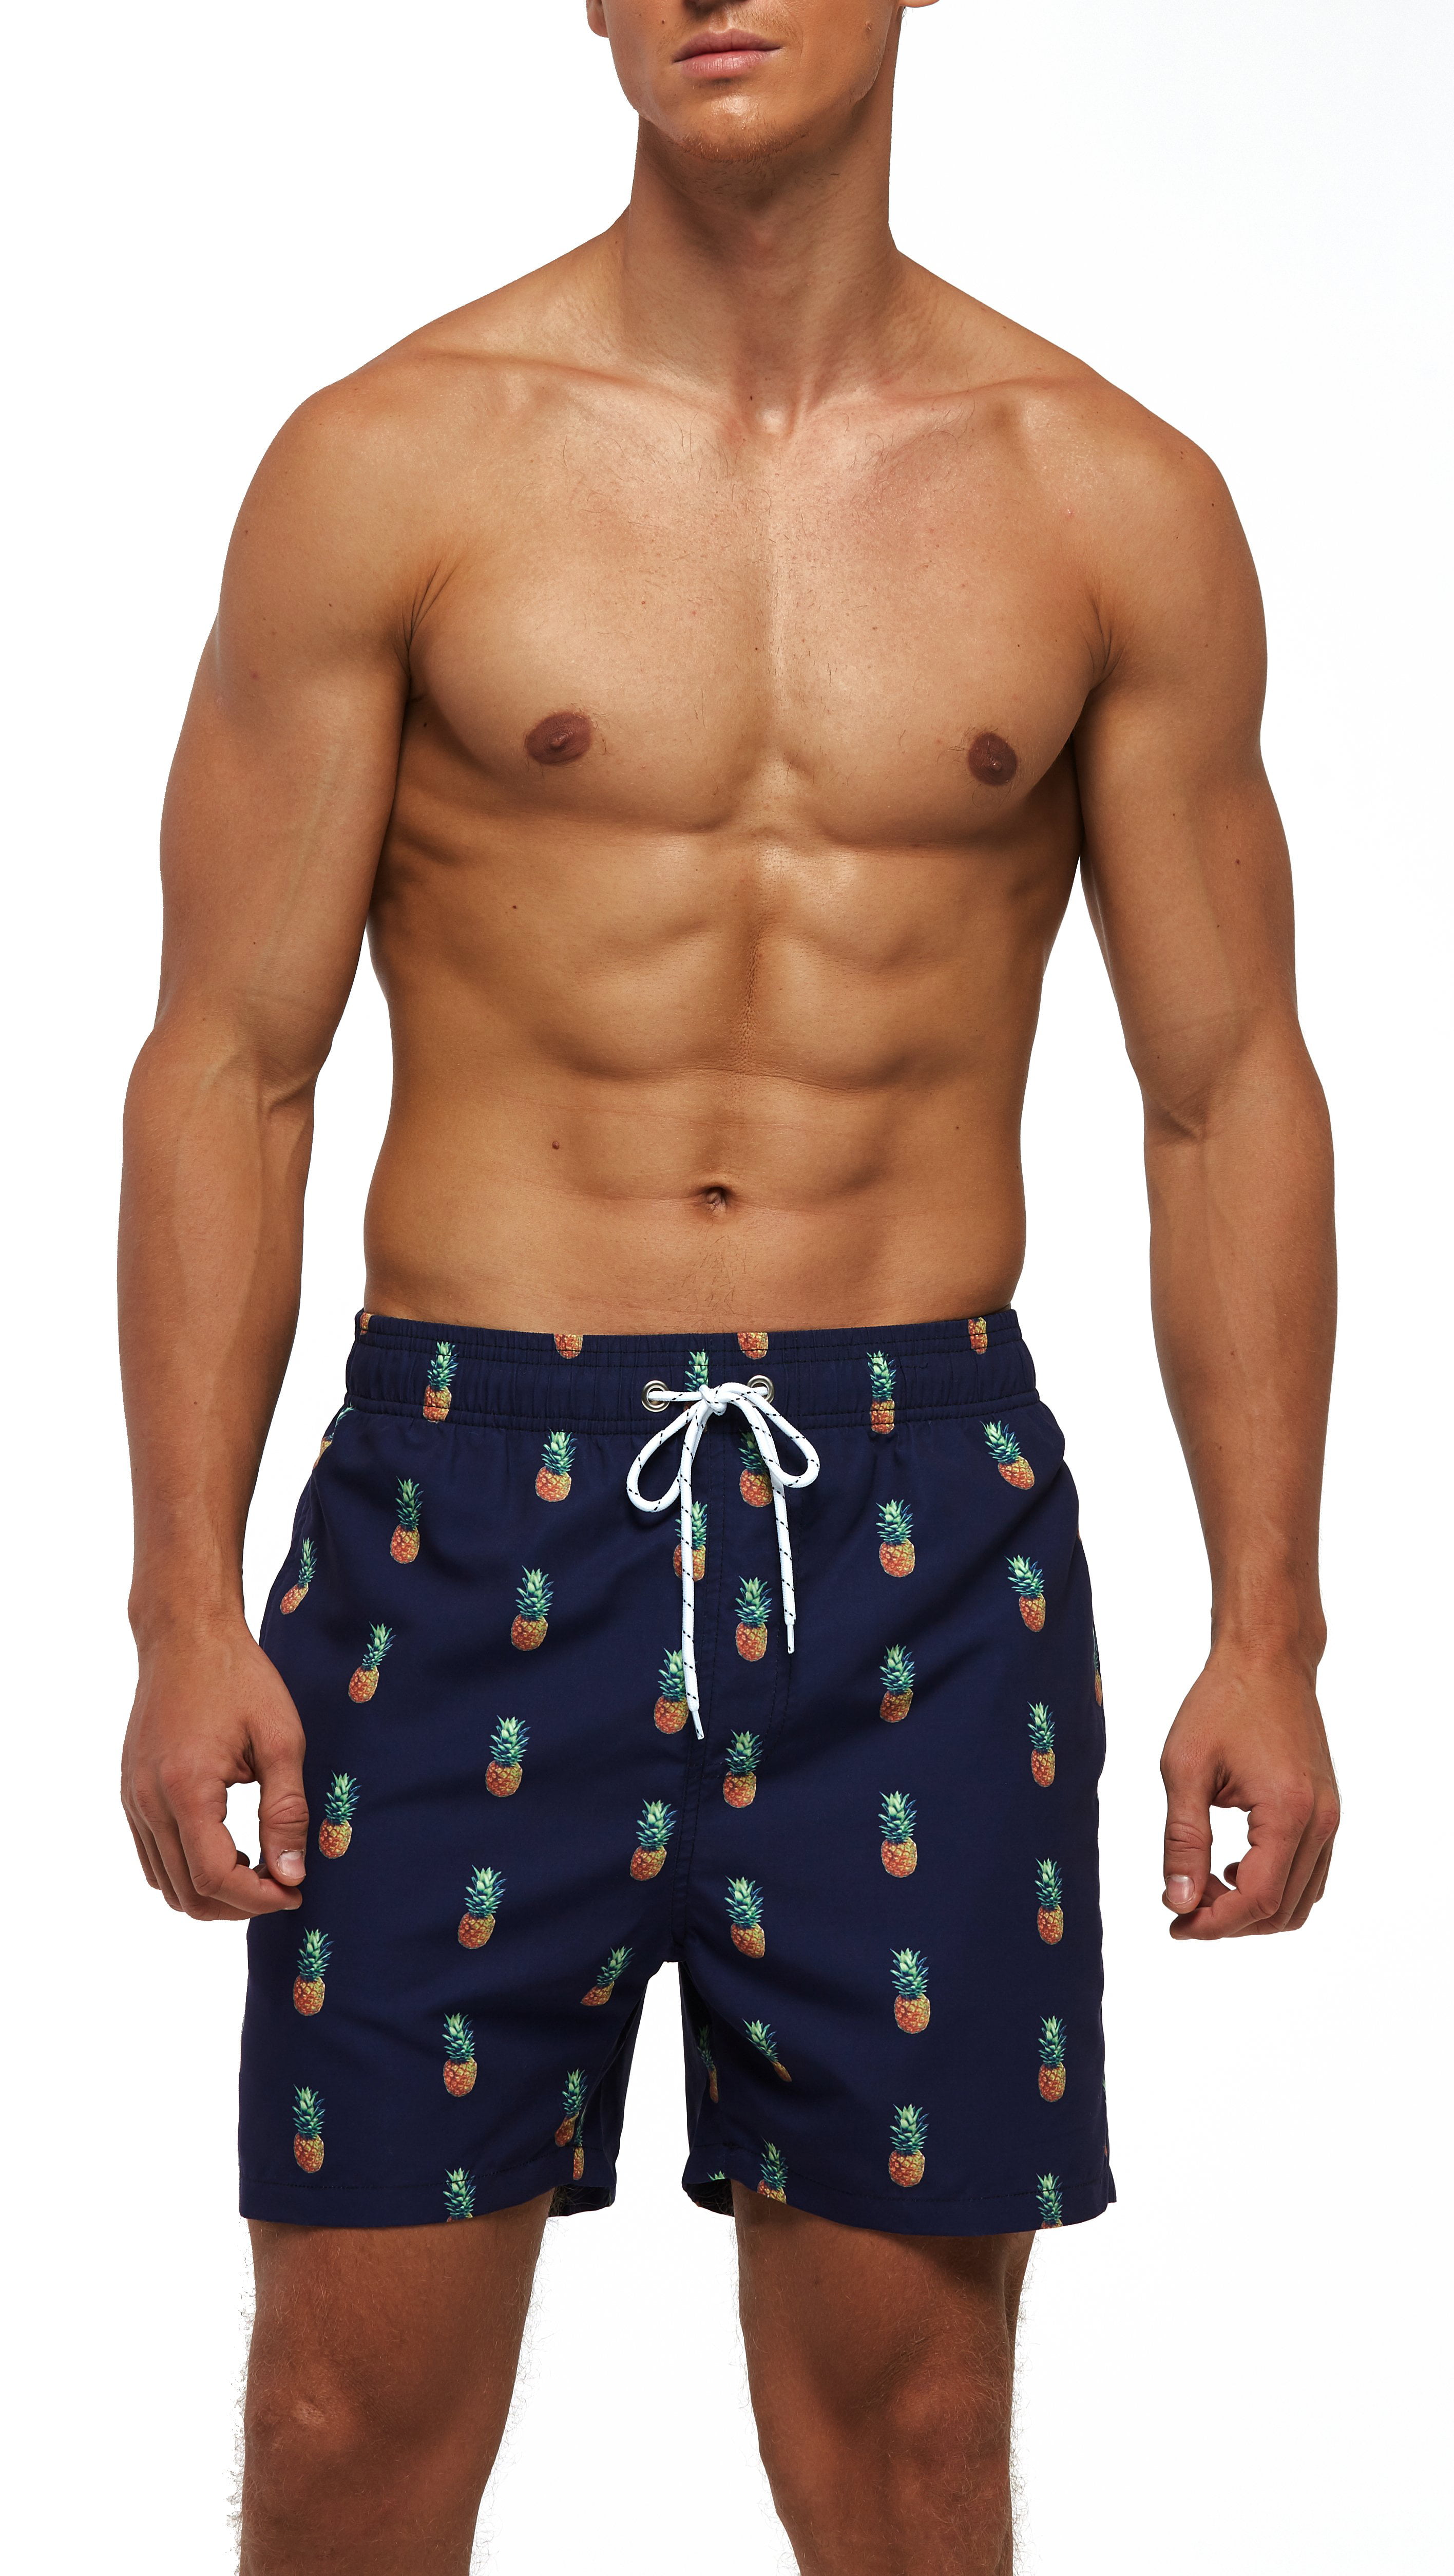 Suslo Couture Men's Quick Dry Fashion Printed Swim Trunks with Front & Back Pockets 